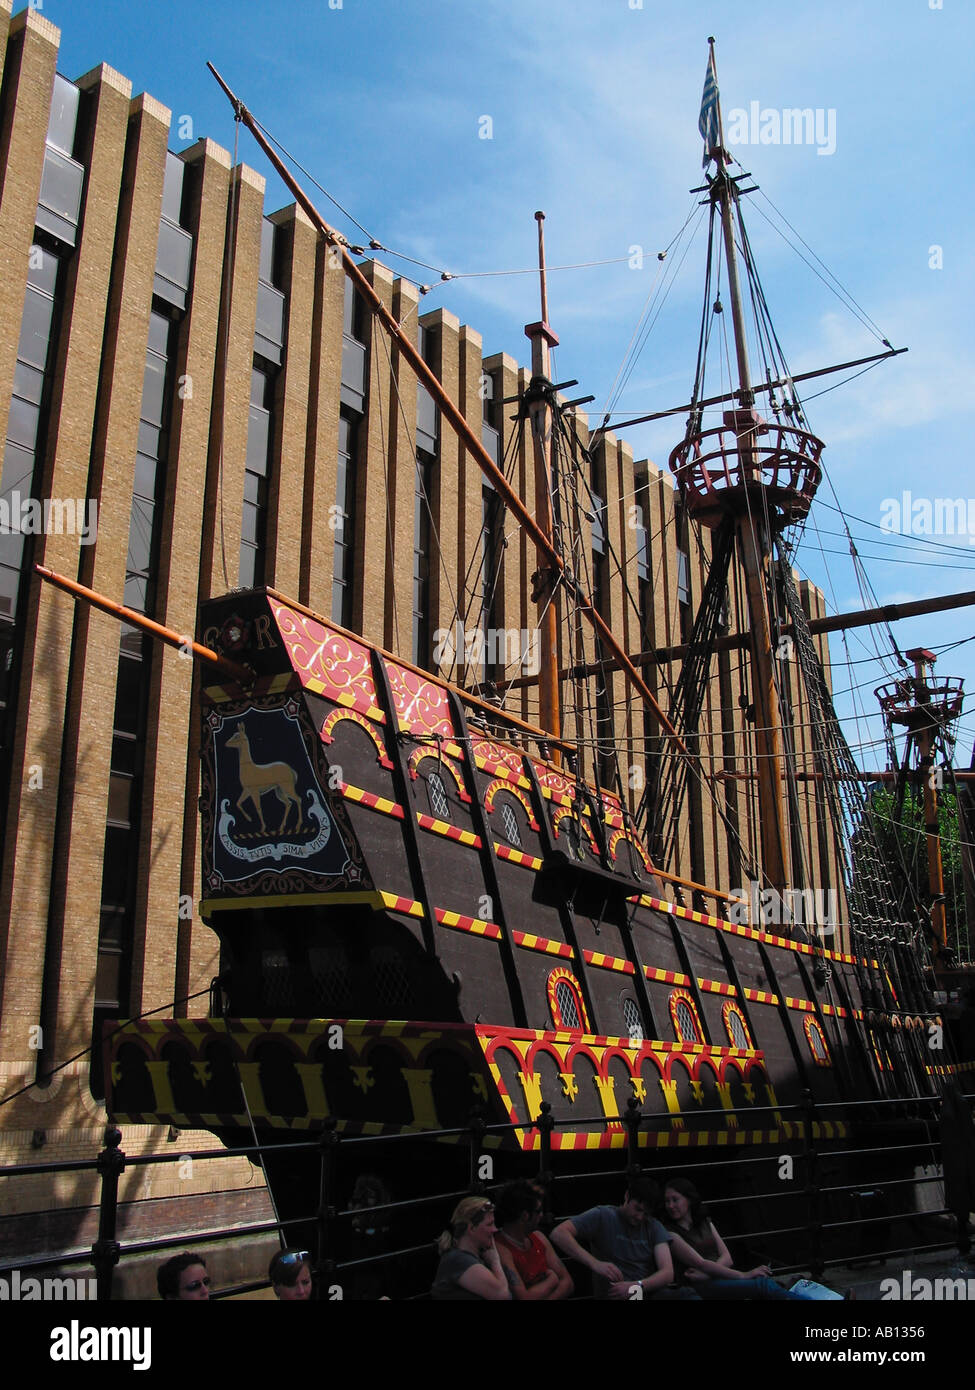 ST Mary Overie's Dock, Golden Hinde Replica Galleon, Cathedral St, Southwark, London England, Großbritannien Stockfoto